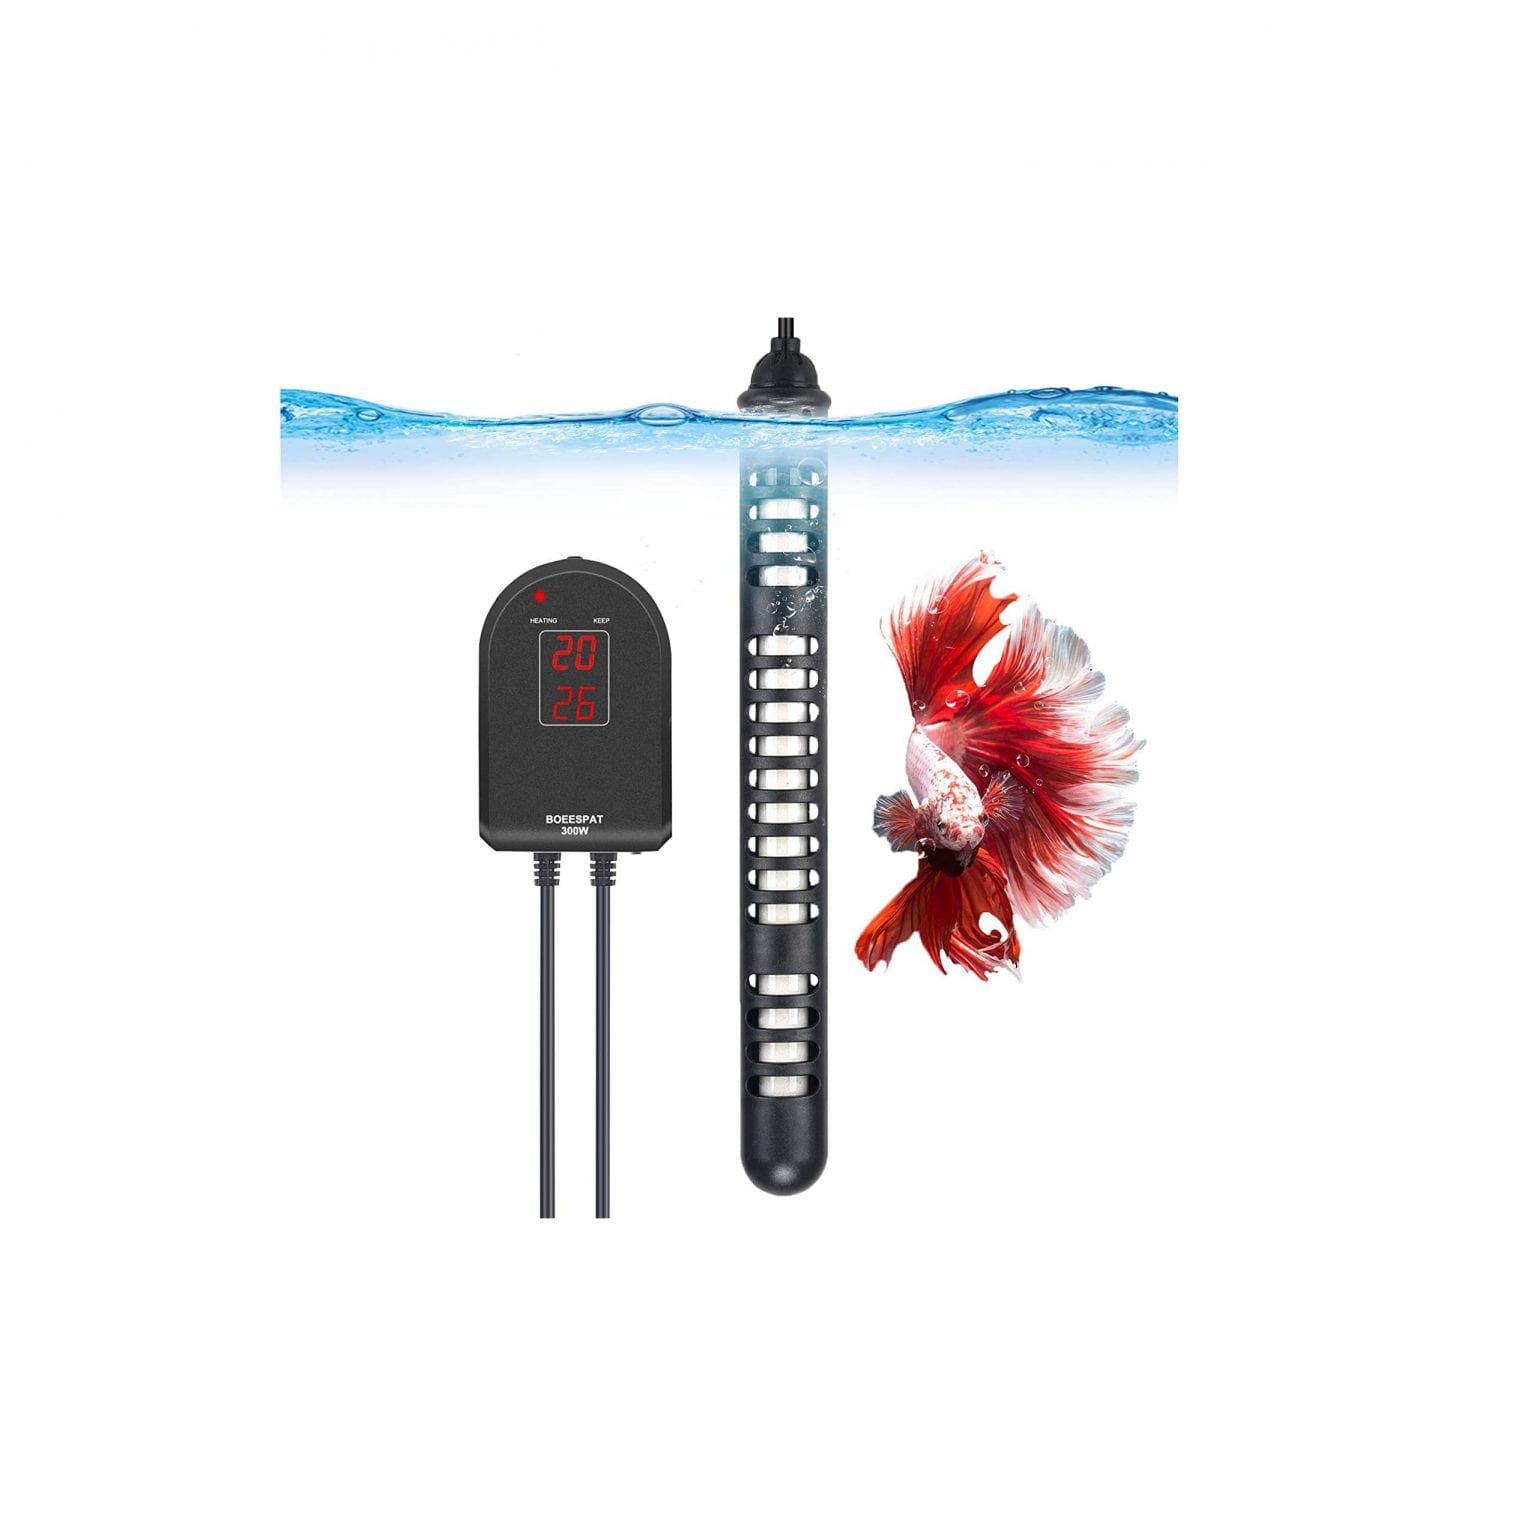 Top 10 Best Submersible Heaters in 2023 Reviews | Buyer's Guide